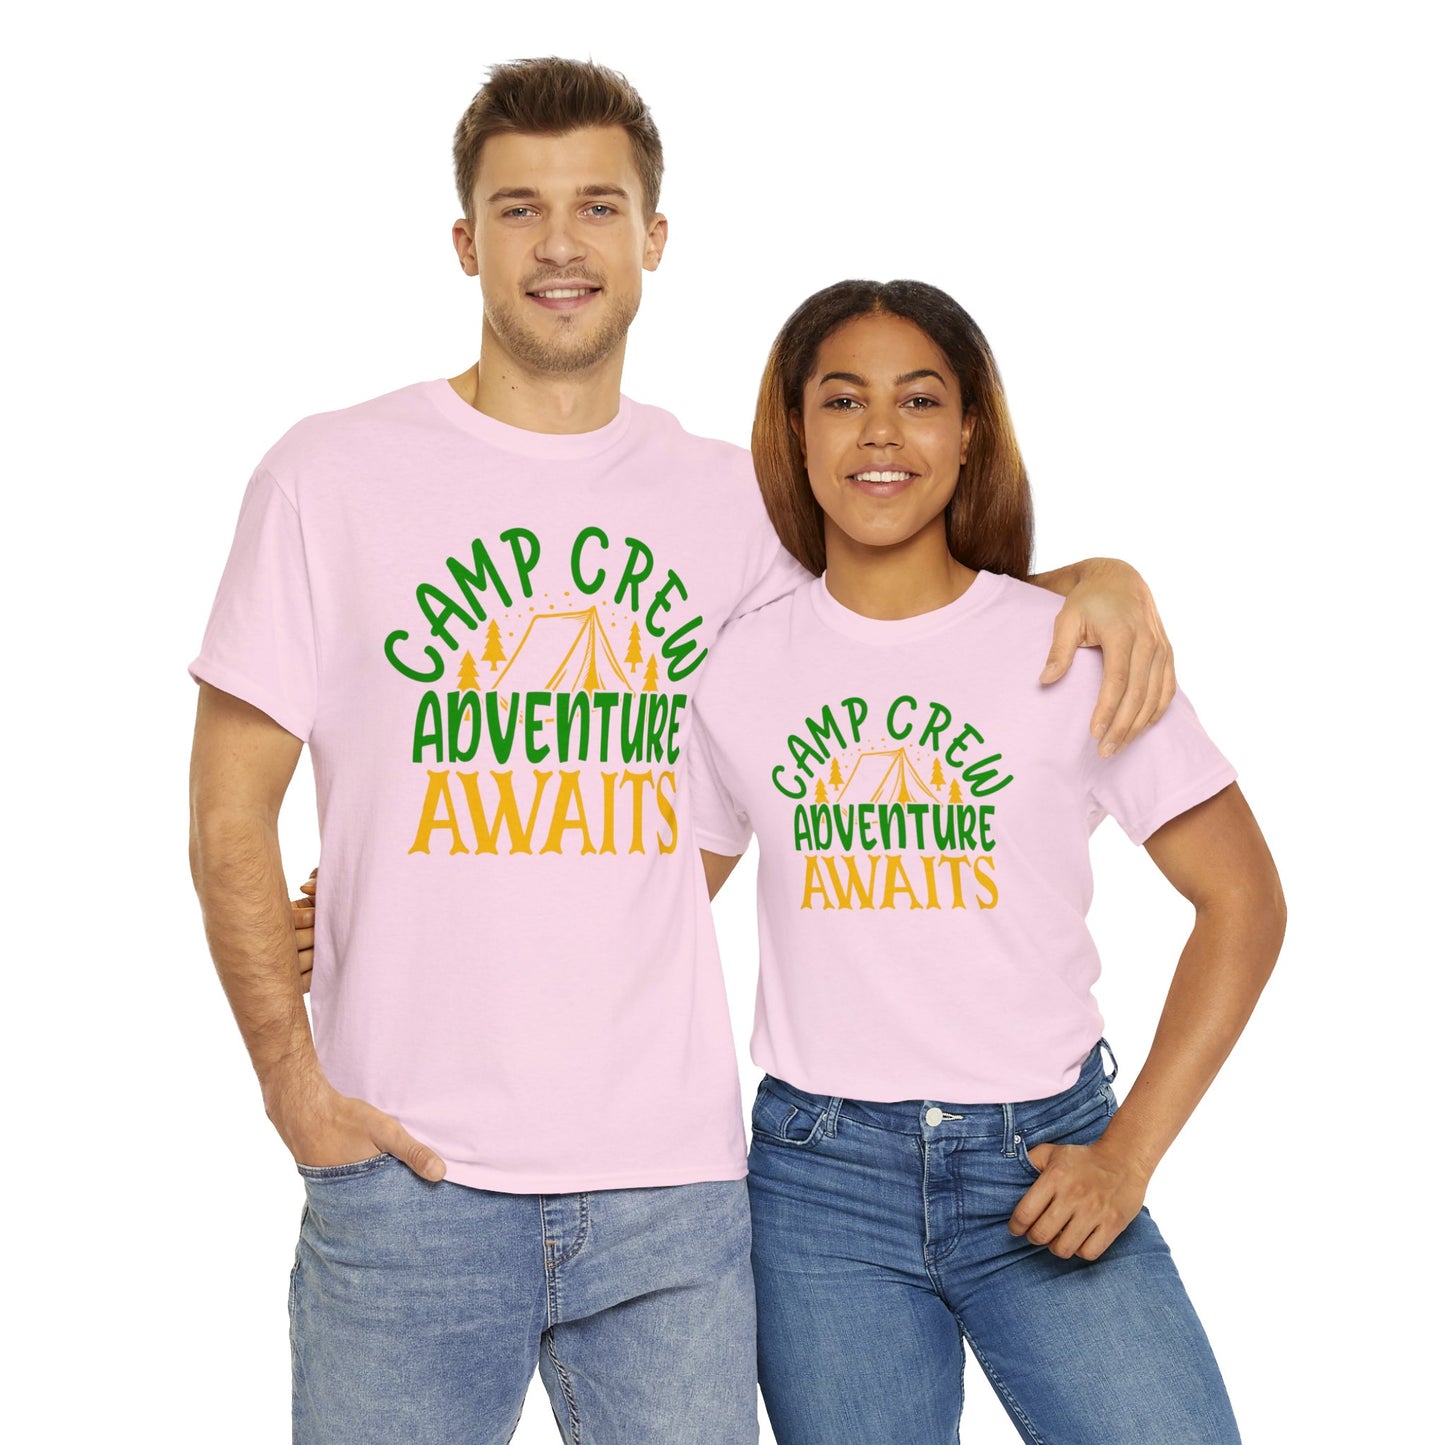 Camp Crew Adventure Awaits' T-Shirt - Your Ultimate Outdoor Companion!